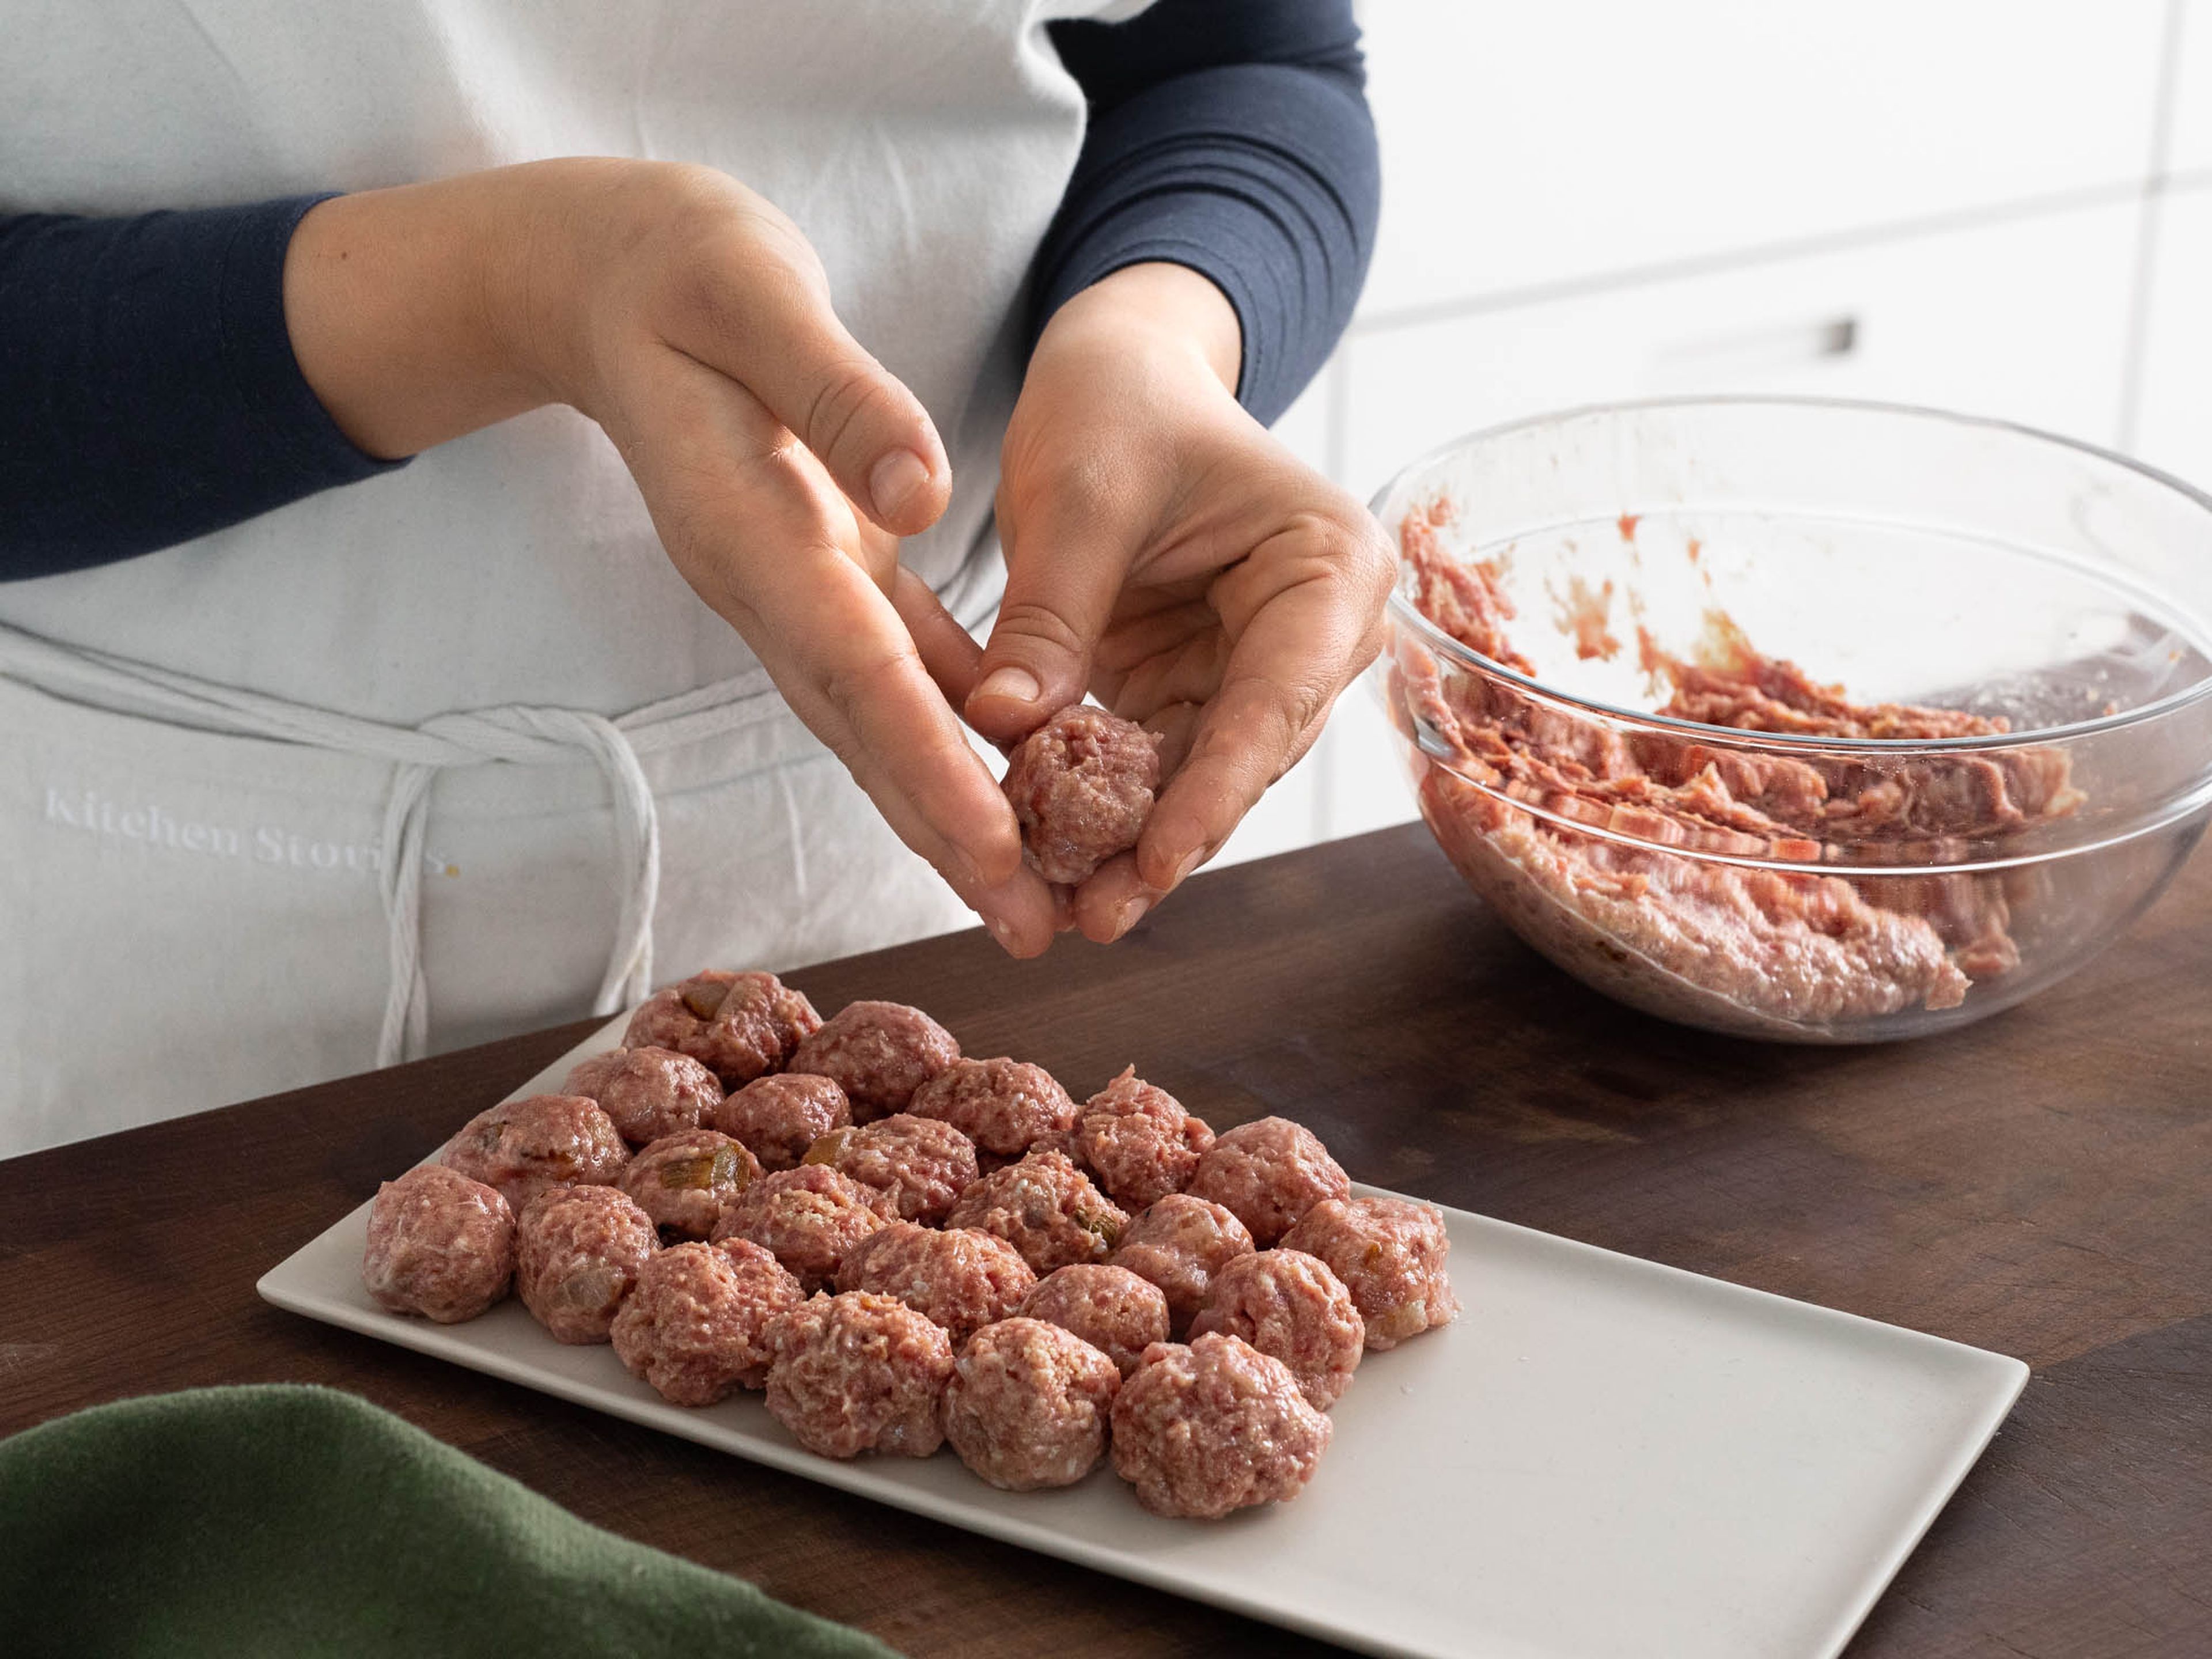 Heat vegetable oil in a pan, then add onion and garlic and sauté until golden brown. In a large bowl, mix ground veal with sautéed onion, garlic, soaked bread roll, and egg. Season with salt, pepper, and allspice. With your hands, form the mixture into meatballs.